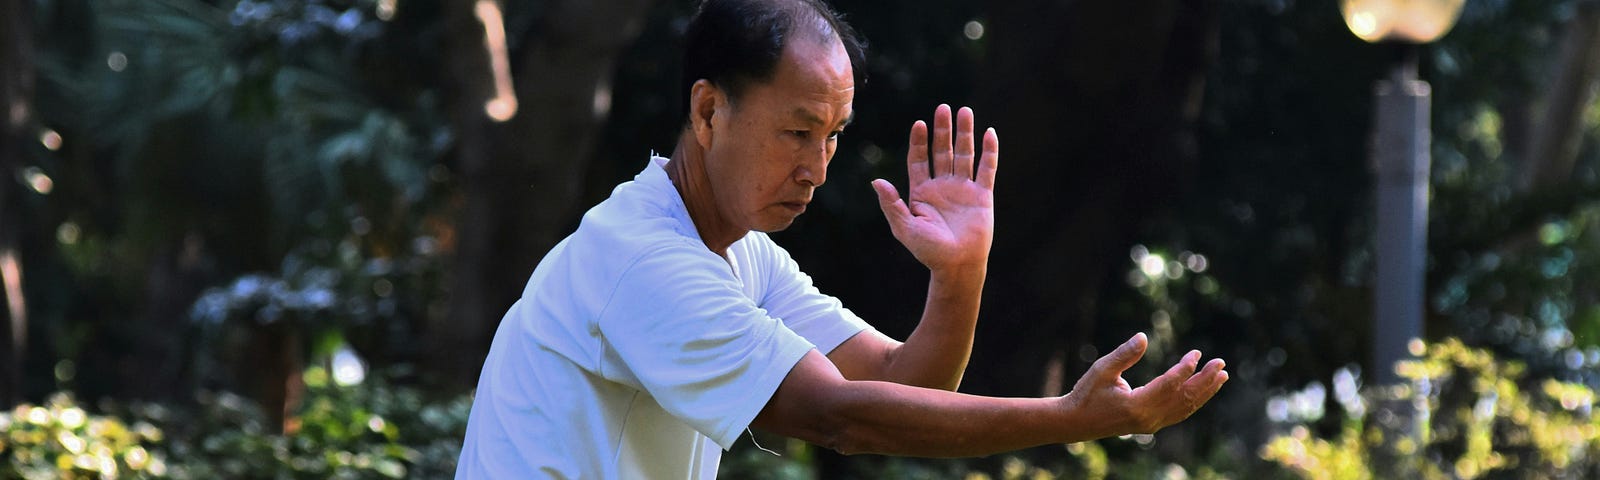 A coloured image showing a man wearing a white teeshirt and black jeans practicing Tai Chi in a park.